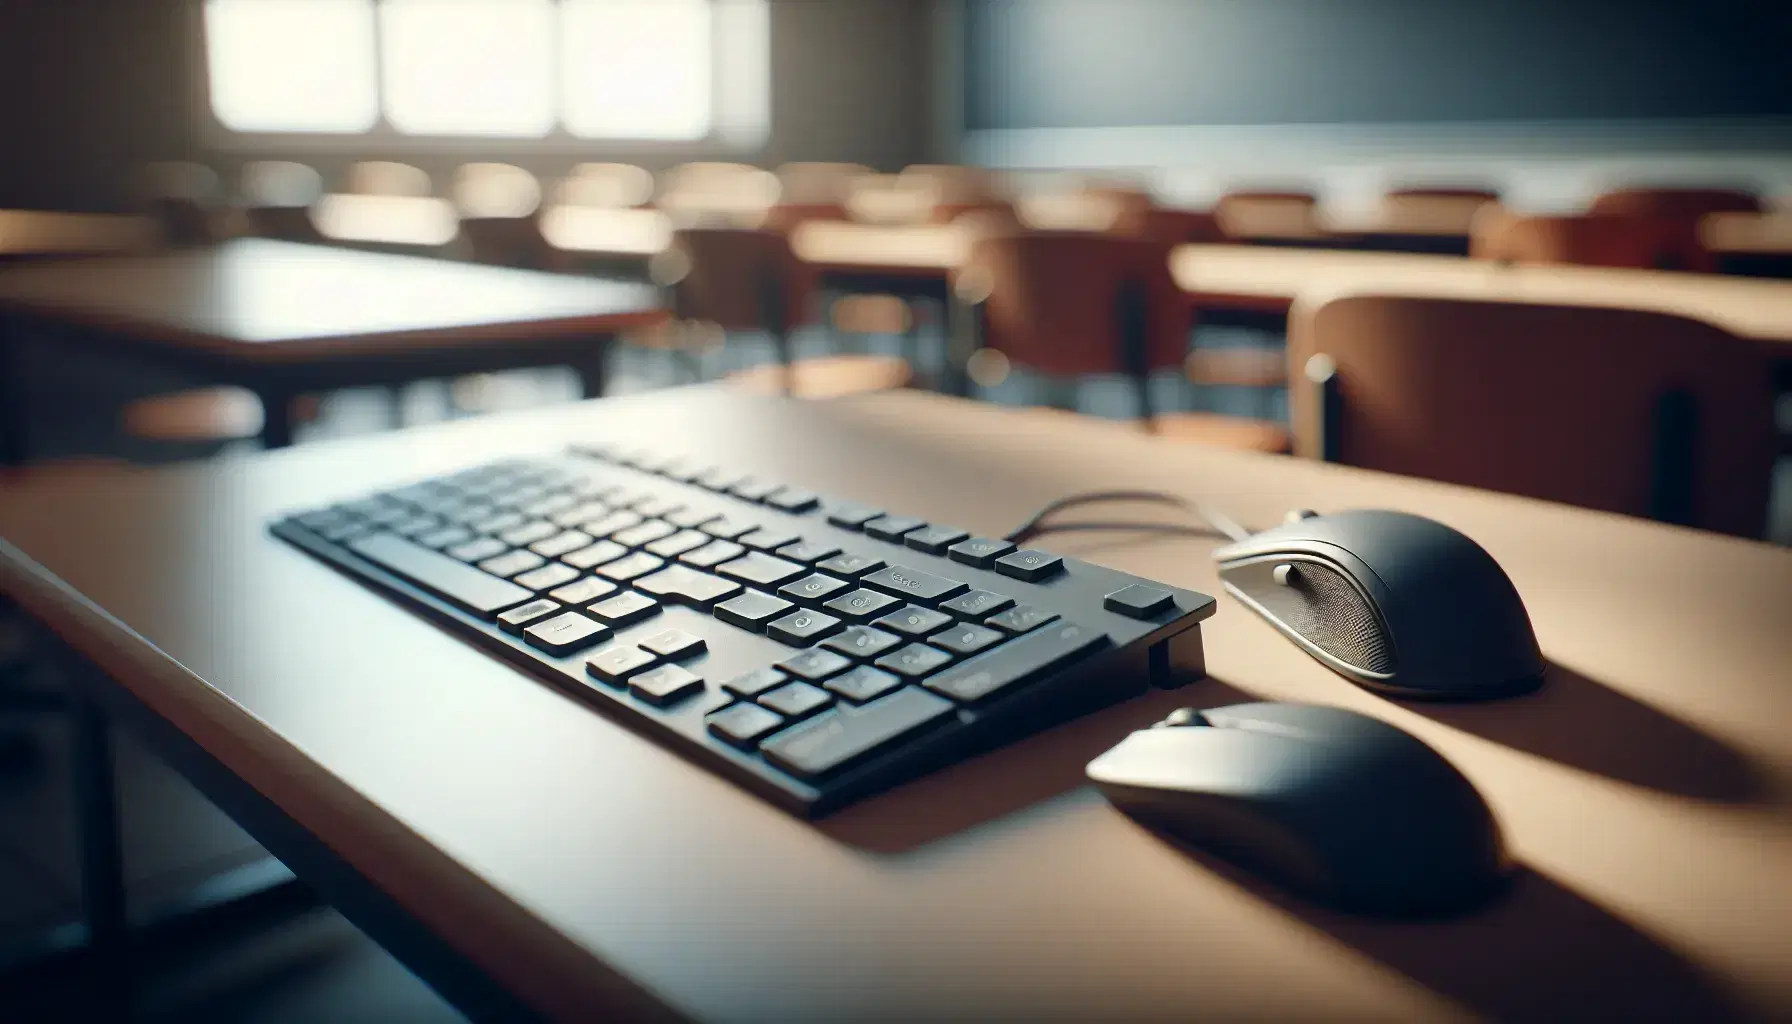 Black keyboard without letters and mouse on desk with blurred background of empty classroom, soft colors and calm atmosphere, ready for use.